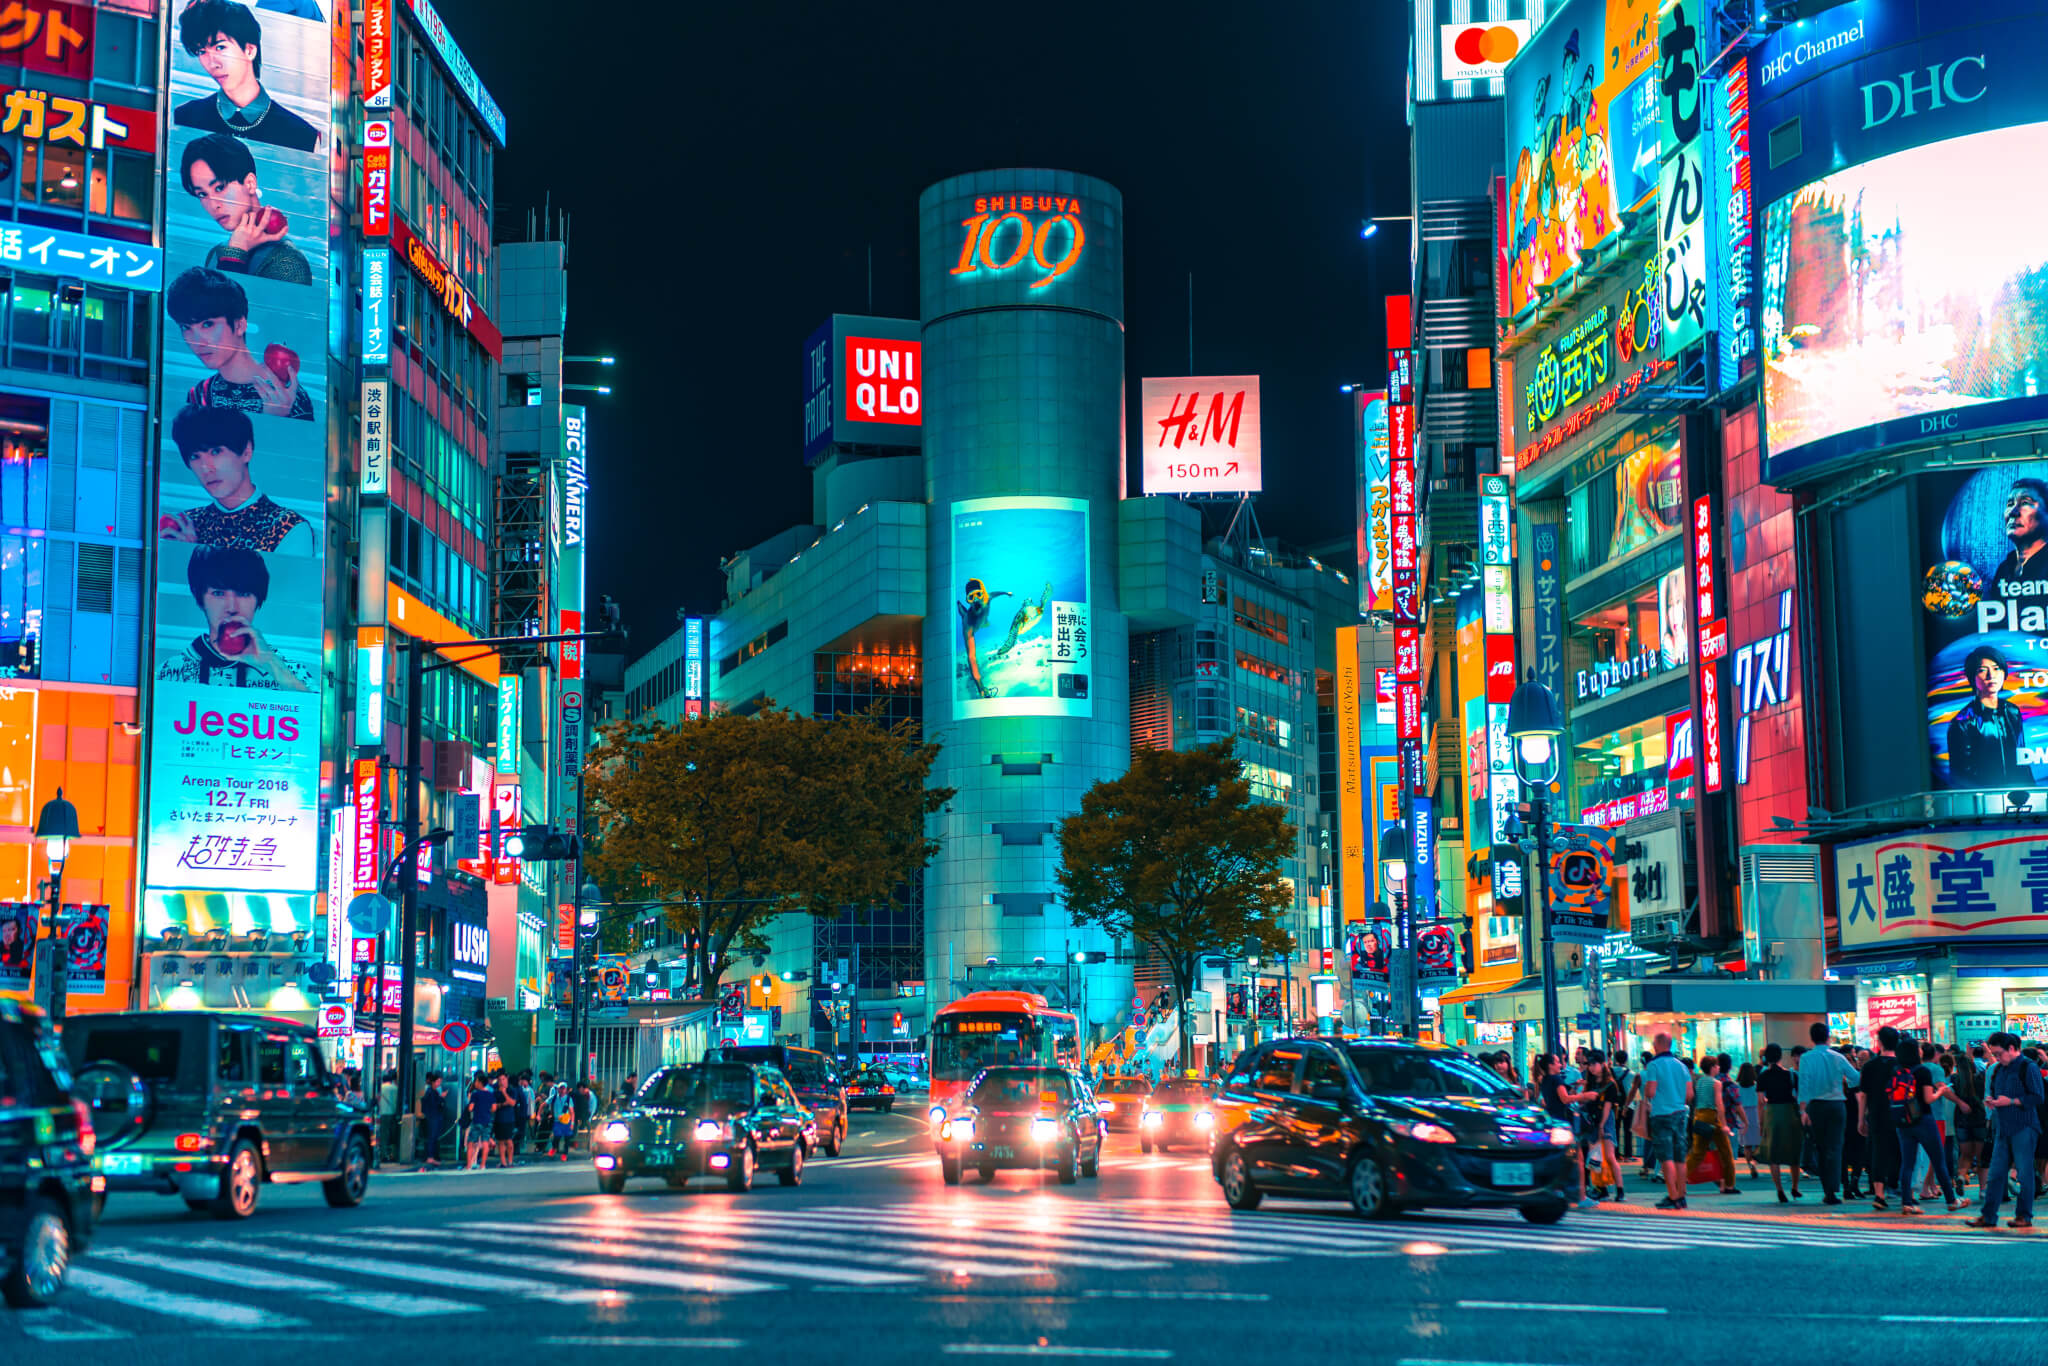 Busy downtown Shibuya, Japan with billboards and lights